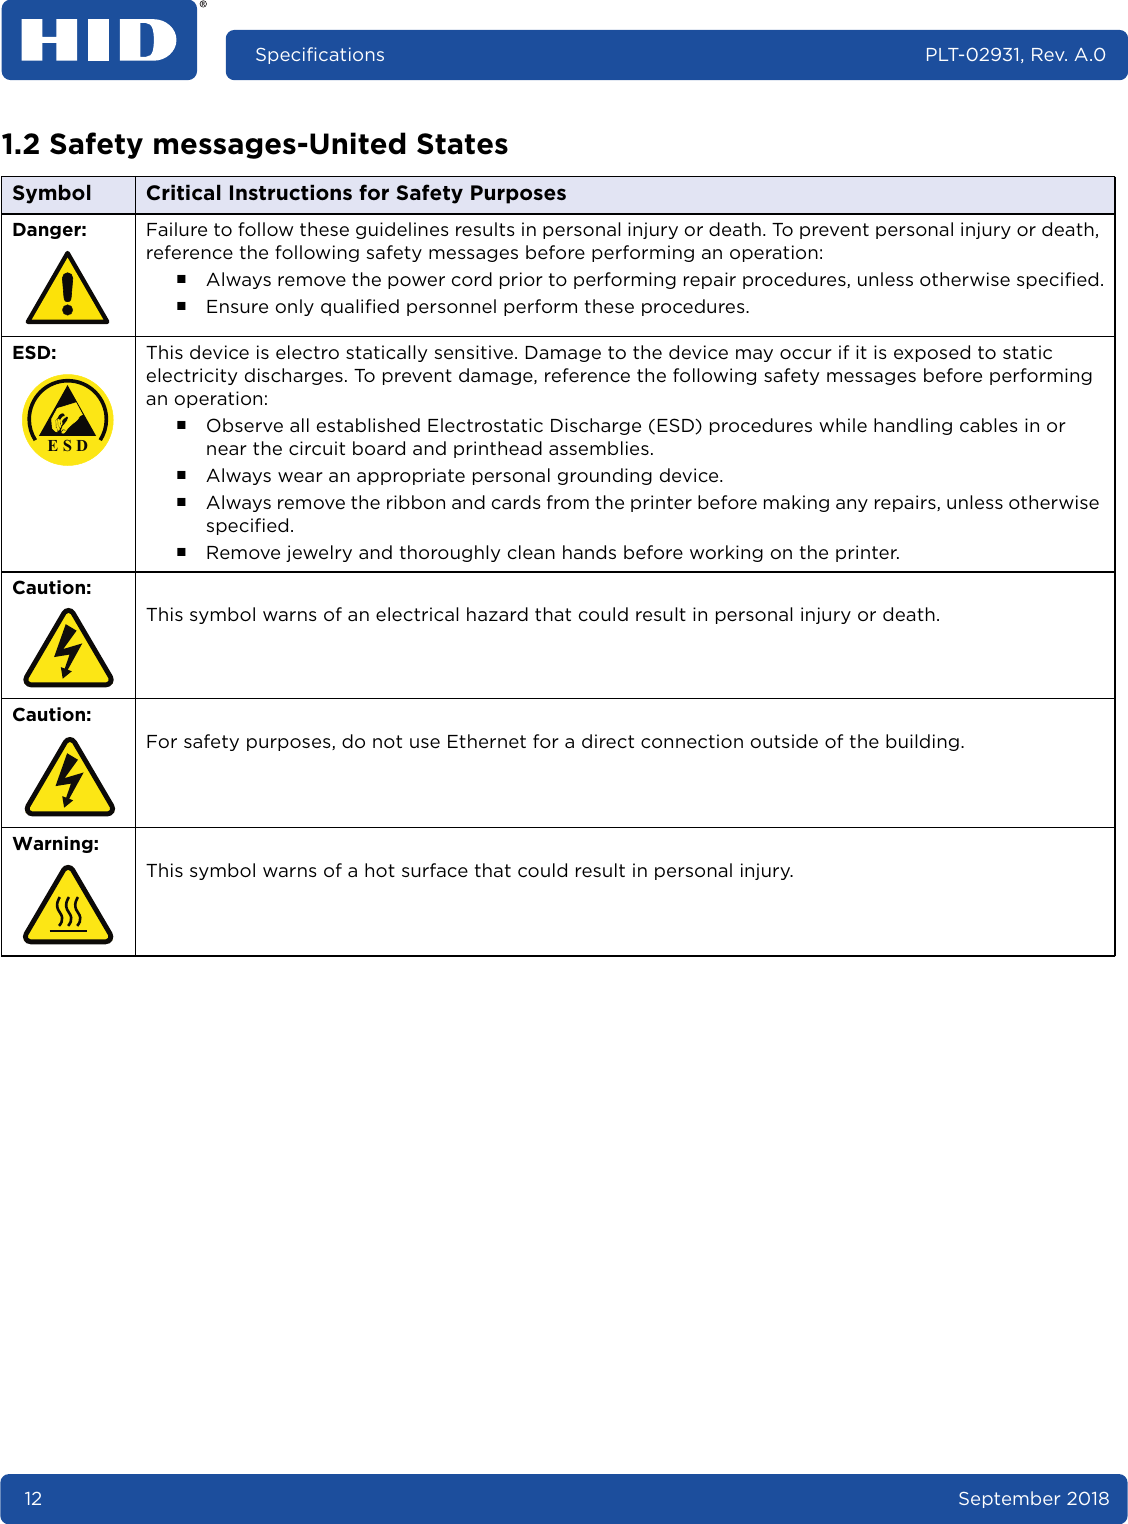 12 September 2018Specifications PLT-02931, Rev. A.01.2 Safety messages-United StatesSymbol Critical Instructions for Safety PurposesDanger: Failure to follow these guidelines results in personal injury or death. To prevent personal injury or death, reference the following safety messages before performing an operation:႑Always remove the power cord prior to performing repair procedures, unless otherwise specified.႑Ensure only qualified personnel perform these procedures.ESD: This device is electro statically sensitive. Damage to the device may occur if it is exposed to static electricity discharges. To prevent damage, reference the following safety messages before performing an operation:႑Observe all established Electrostatic Discharge (ESD) procedures while handling cables in or near the circuit board and printhead assemblies.႑Always wear an appropriate personal grounding device.႑Always remove the ribbon and cards from the printer before making any repairs, unless otherwise specified.႑Remove jewelry and thoroughly clean hands before working on the printer.Caution:This symbol warns of an electrical hazard that could result in personal injury or death.Caution:For safety purposes, do not use Ethernet for a direct connection outside of the building.Warning:This symbol warns of a hot surface that could result in personal injury. E S D